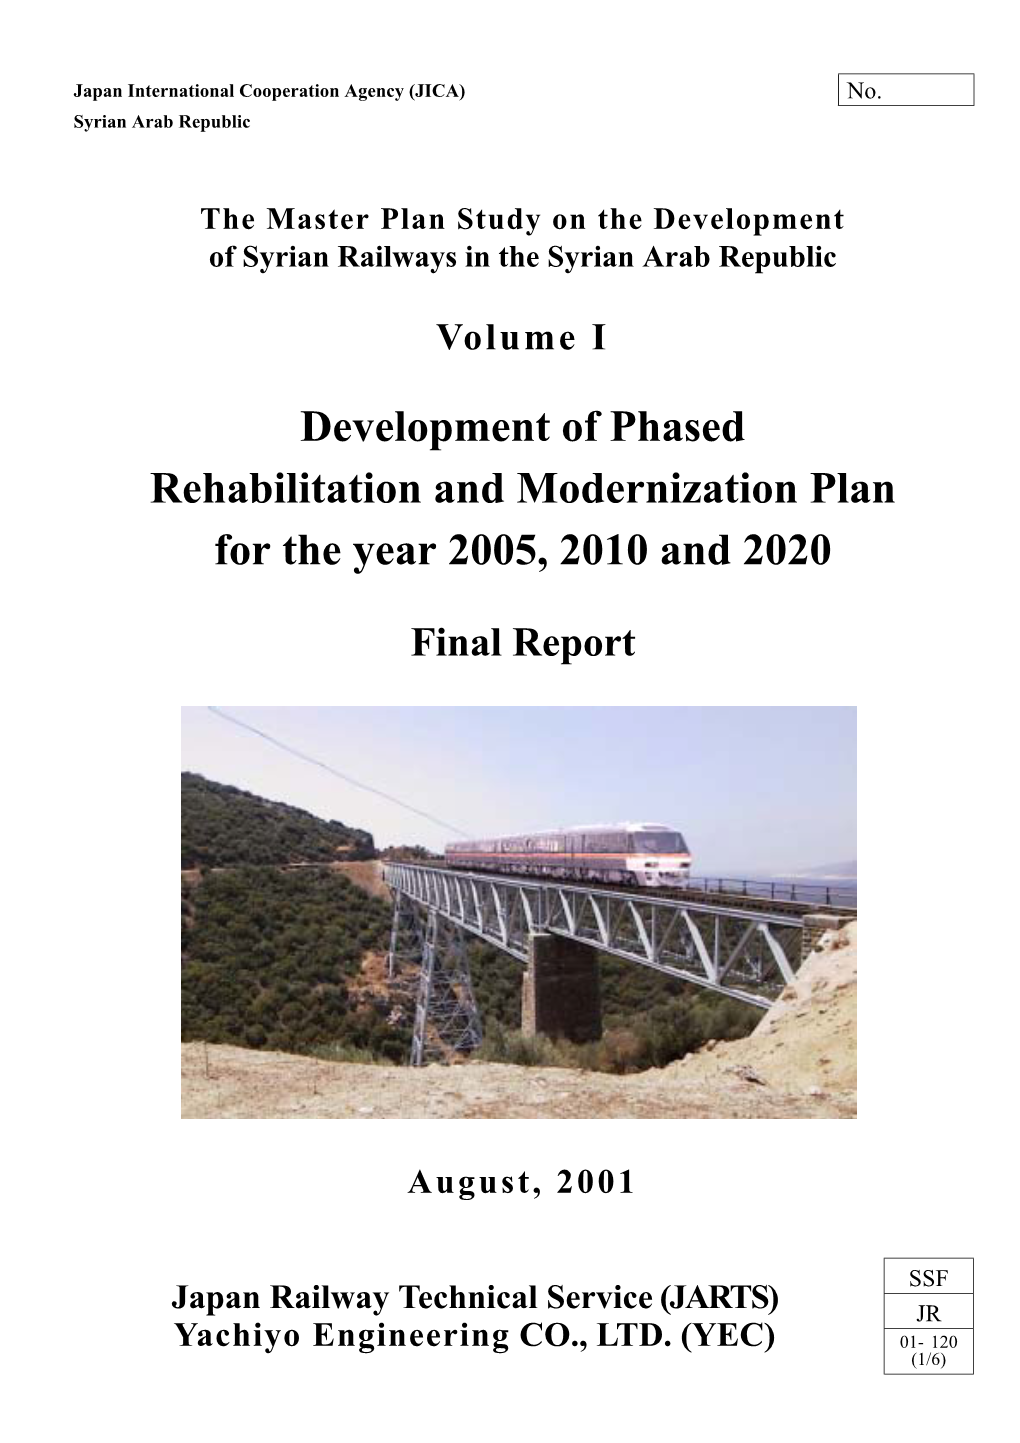 Development of Phased Rehabilitation and Modernization Plan for the Year 2005, 2010 and 2020